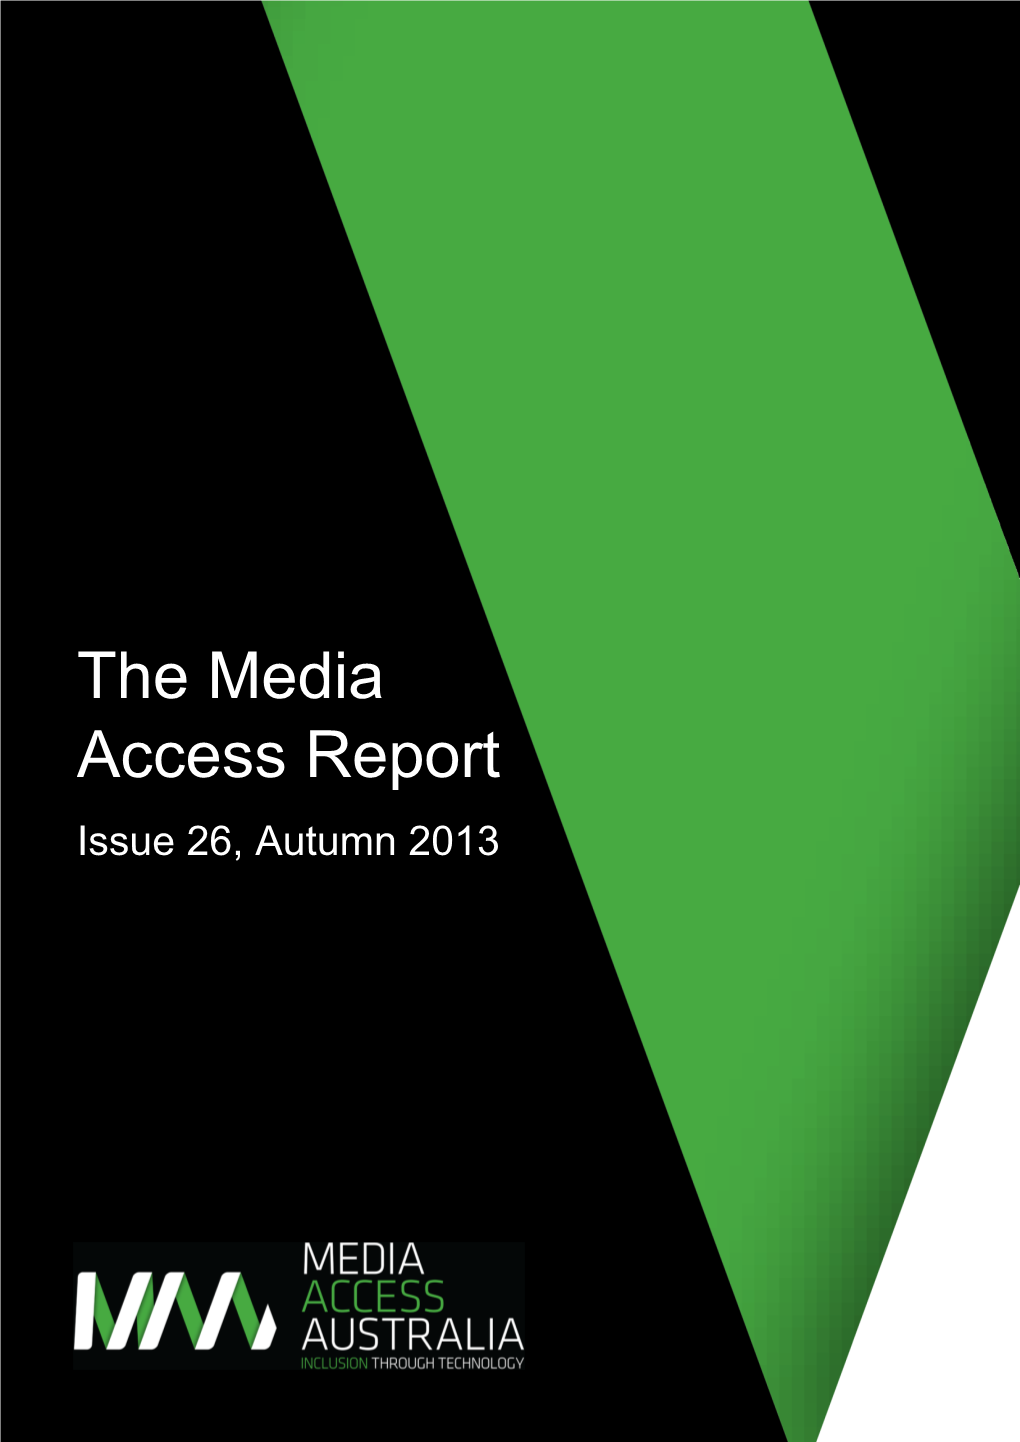 The Media Access Report Issue 26, Autumn 2013